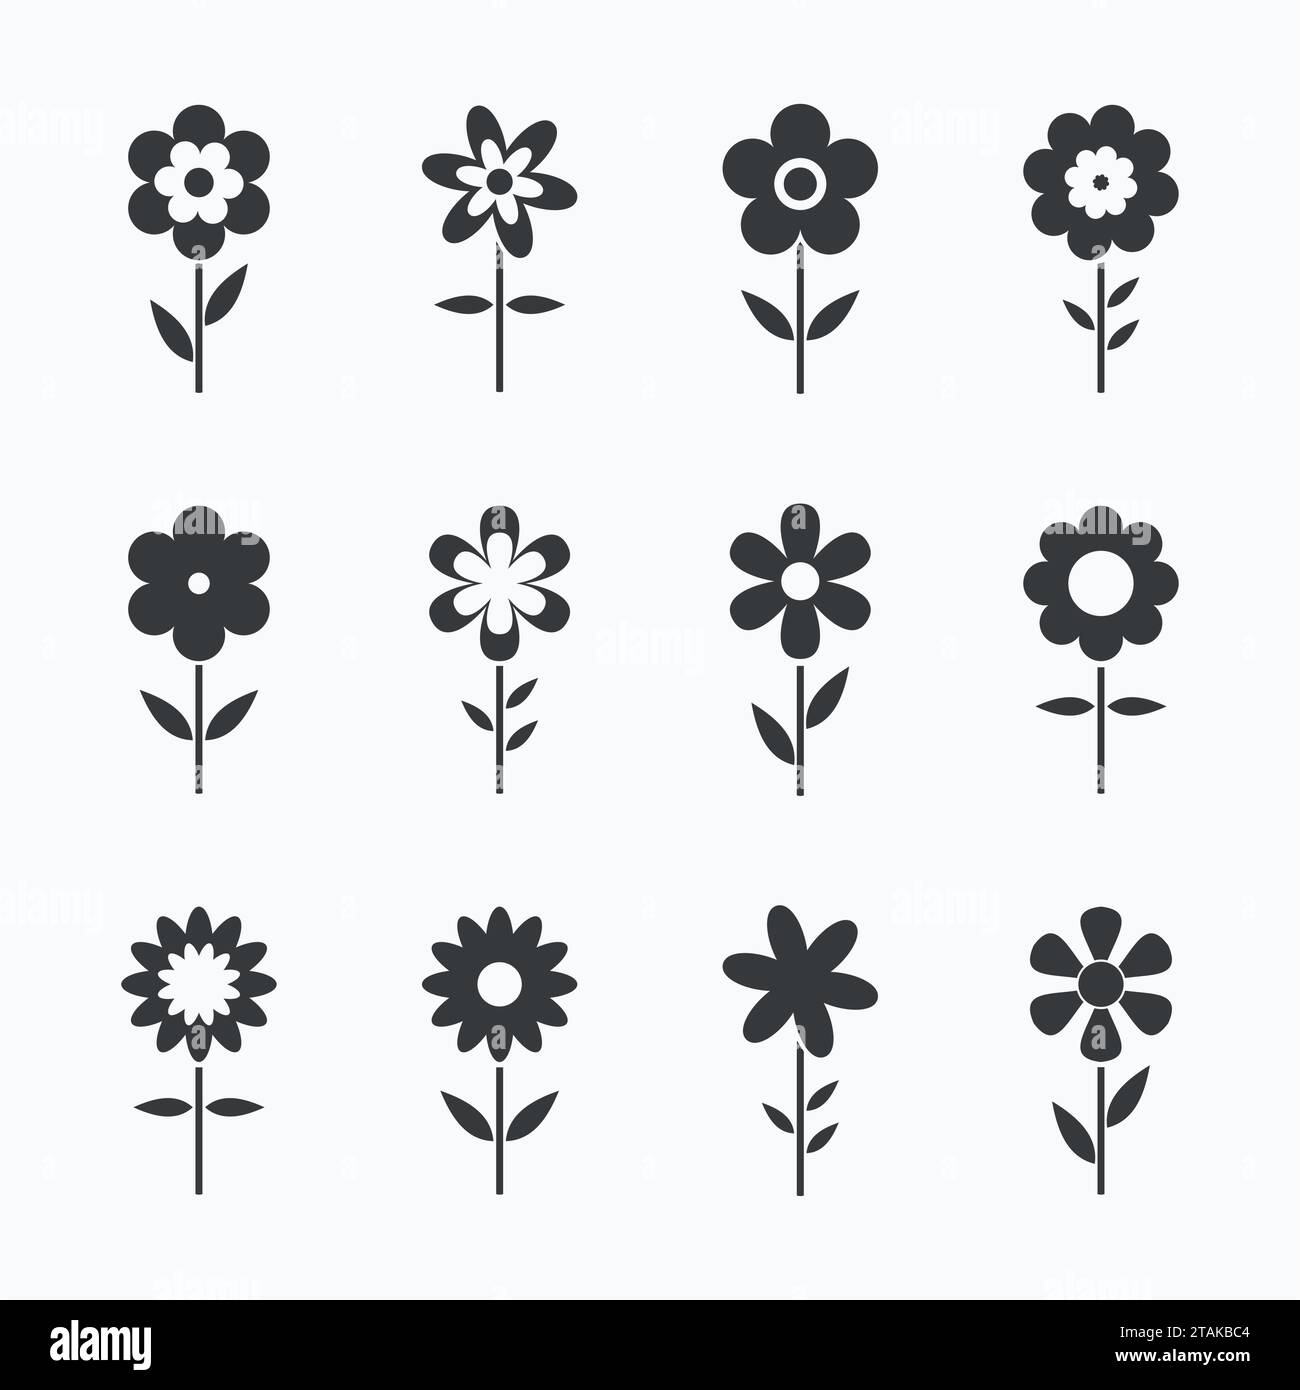 Black Flowers icons isolated on white background. Set of colorful floral icon. Flowers icons in flat dasing style Vector Illustration Stock Vector